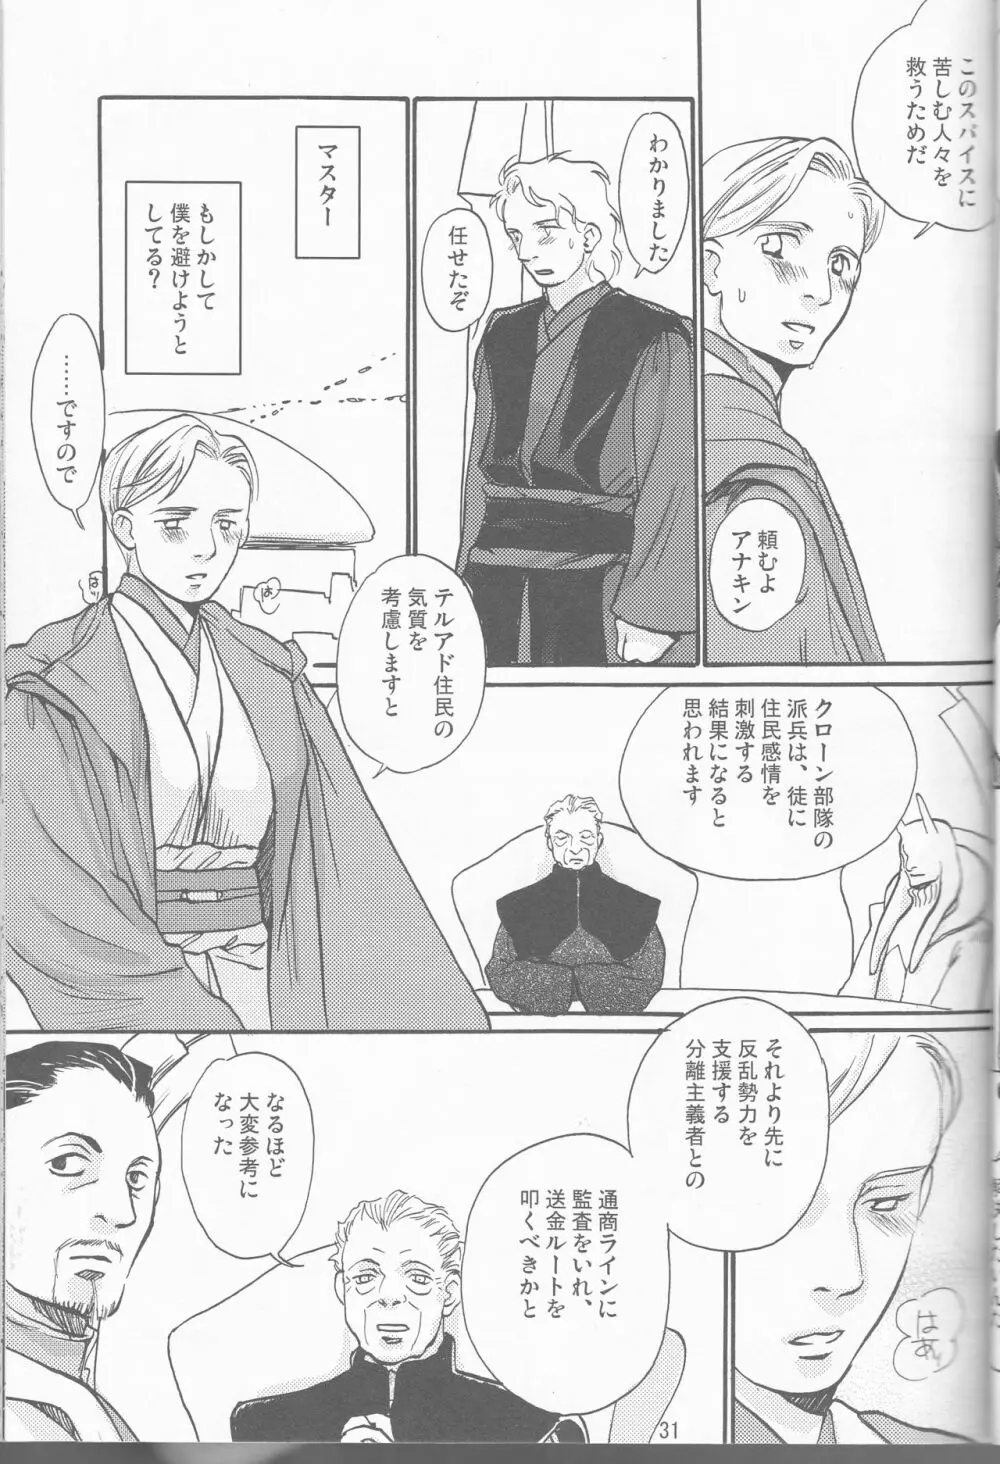 Obi Female Transformation Book 1 of 2 Page.31